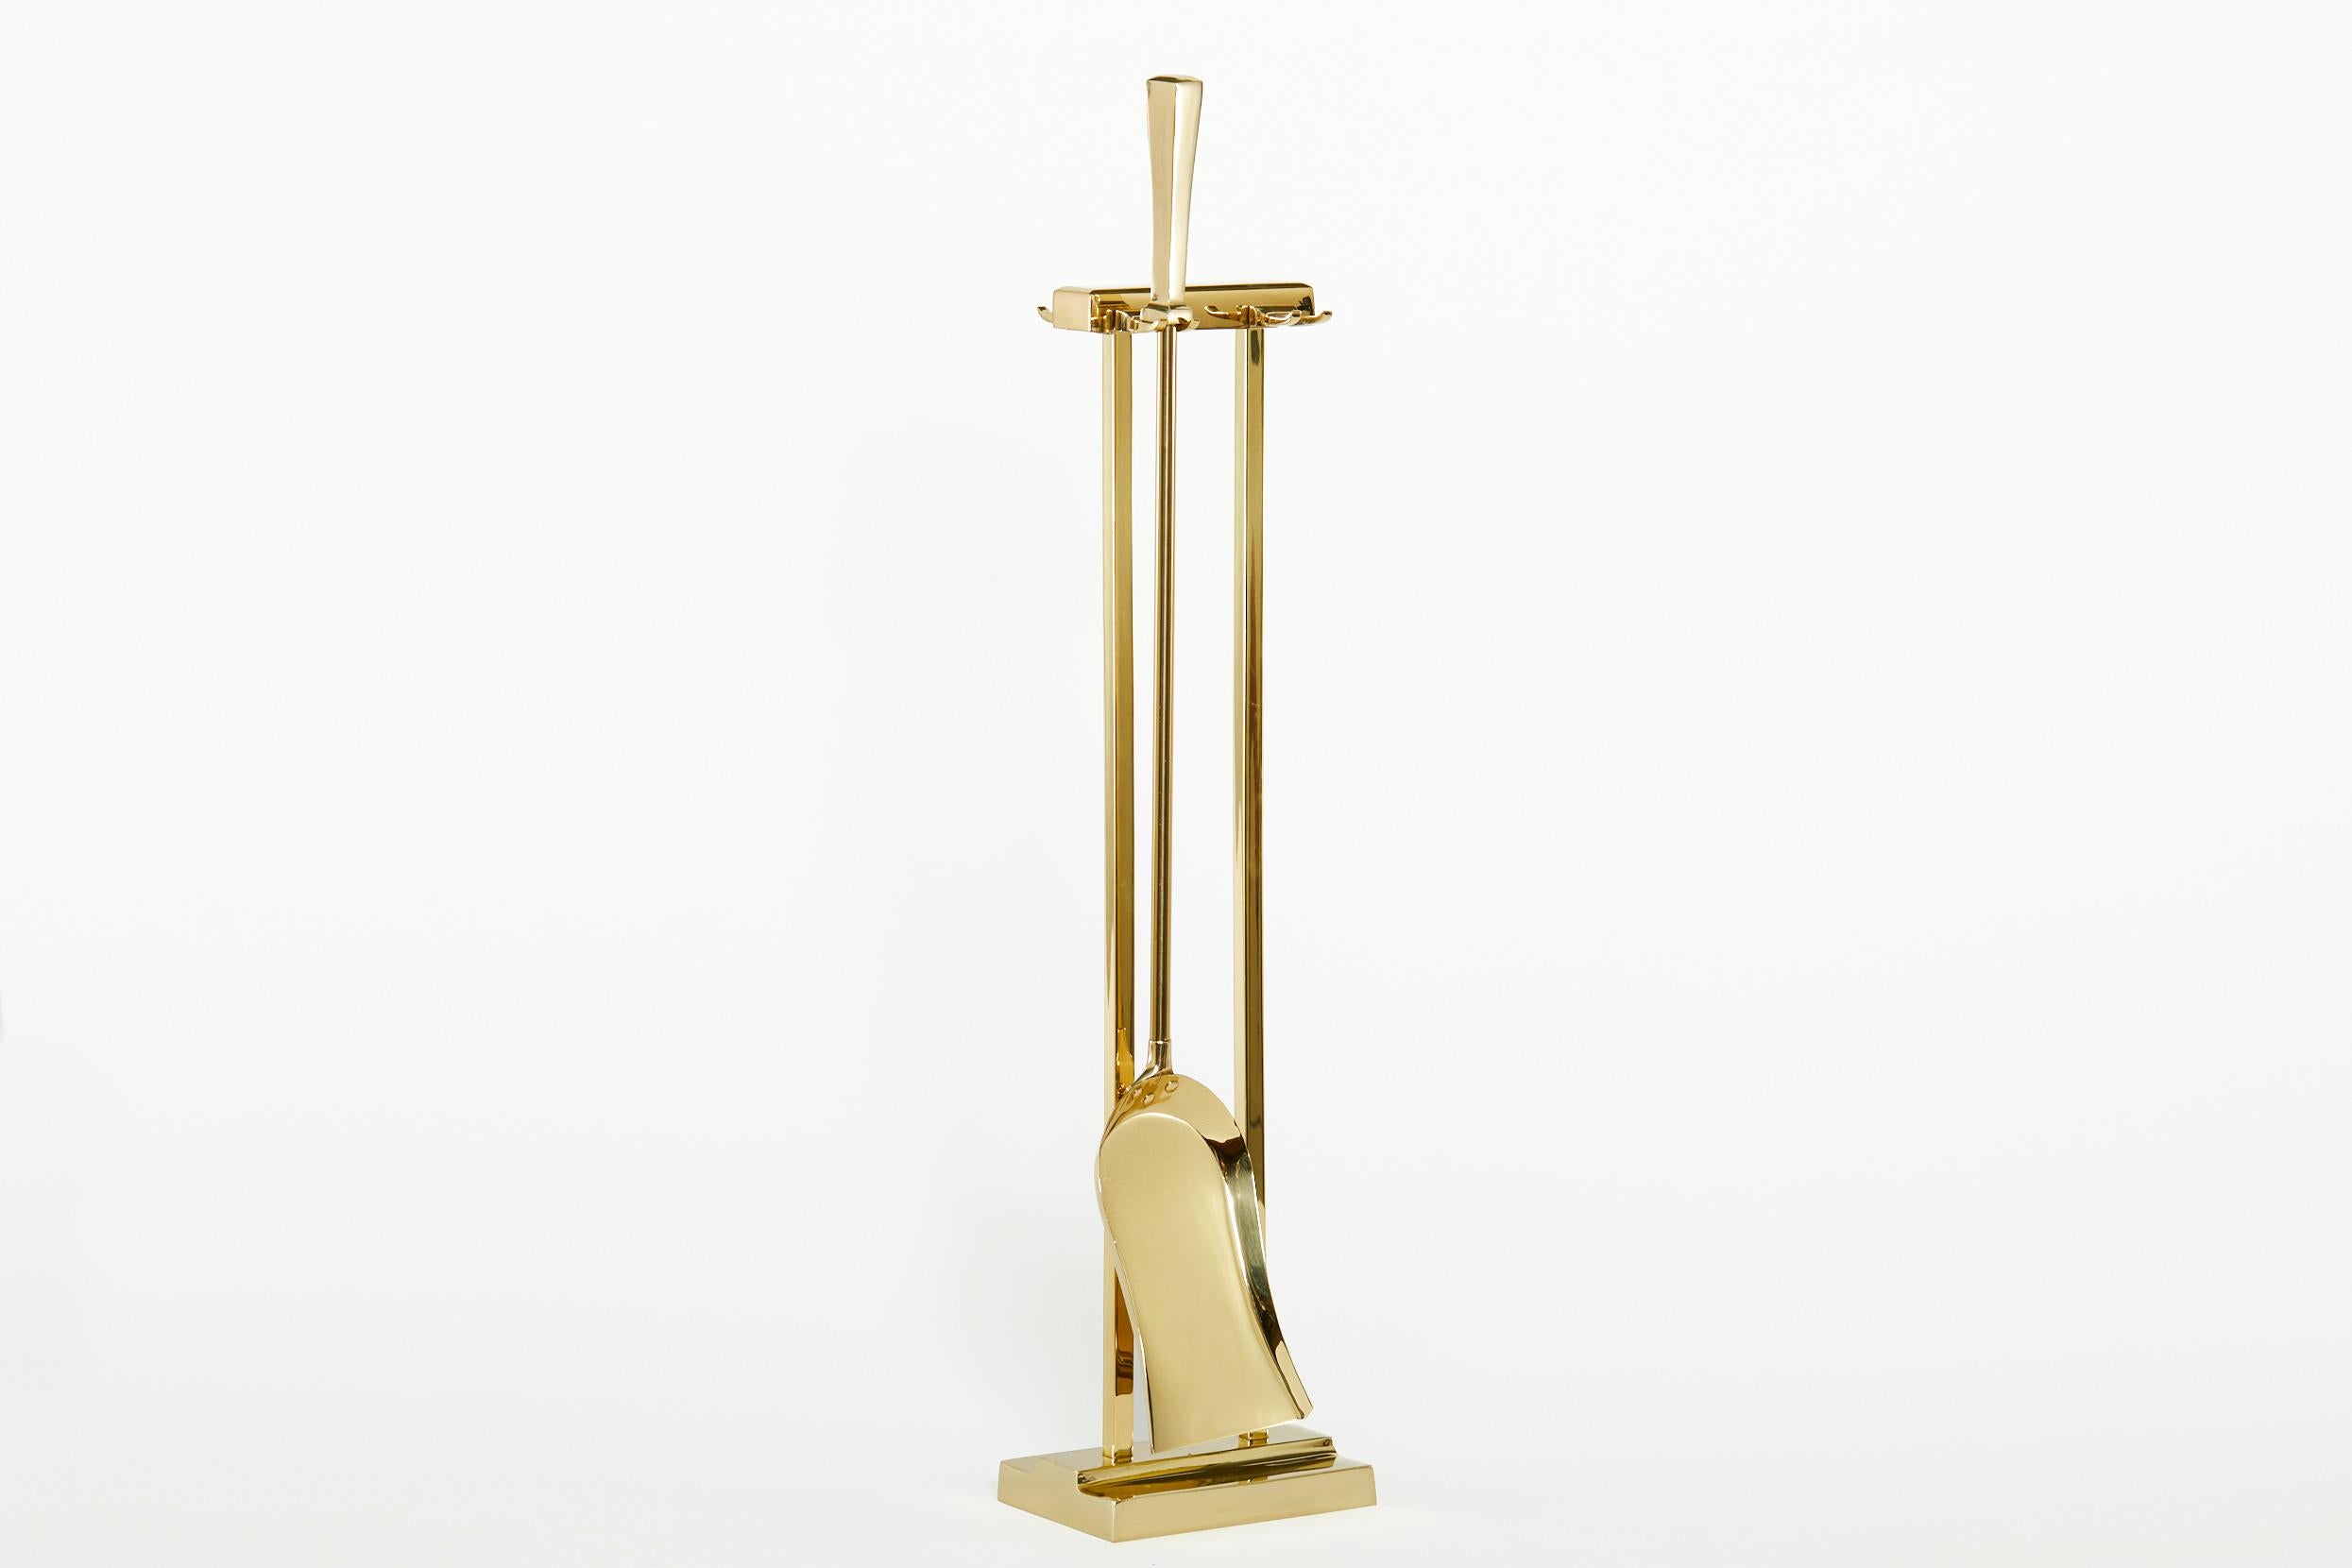 Italian Set Solid Brass Fire Tool / Stand